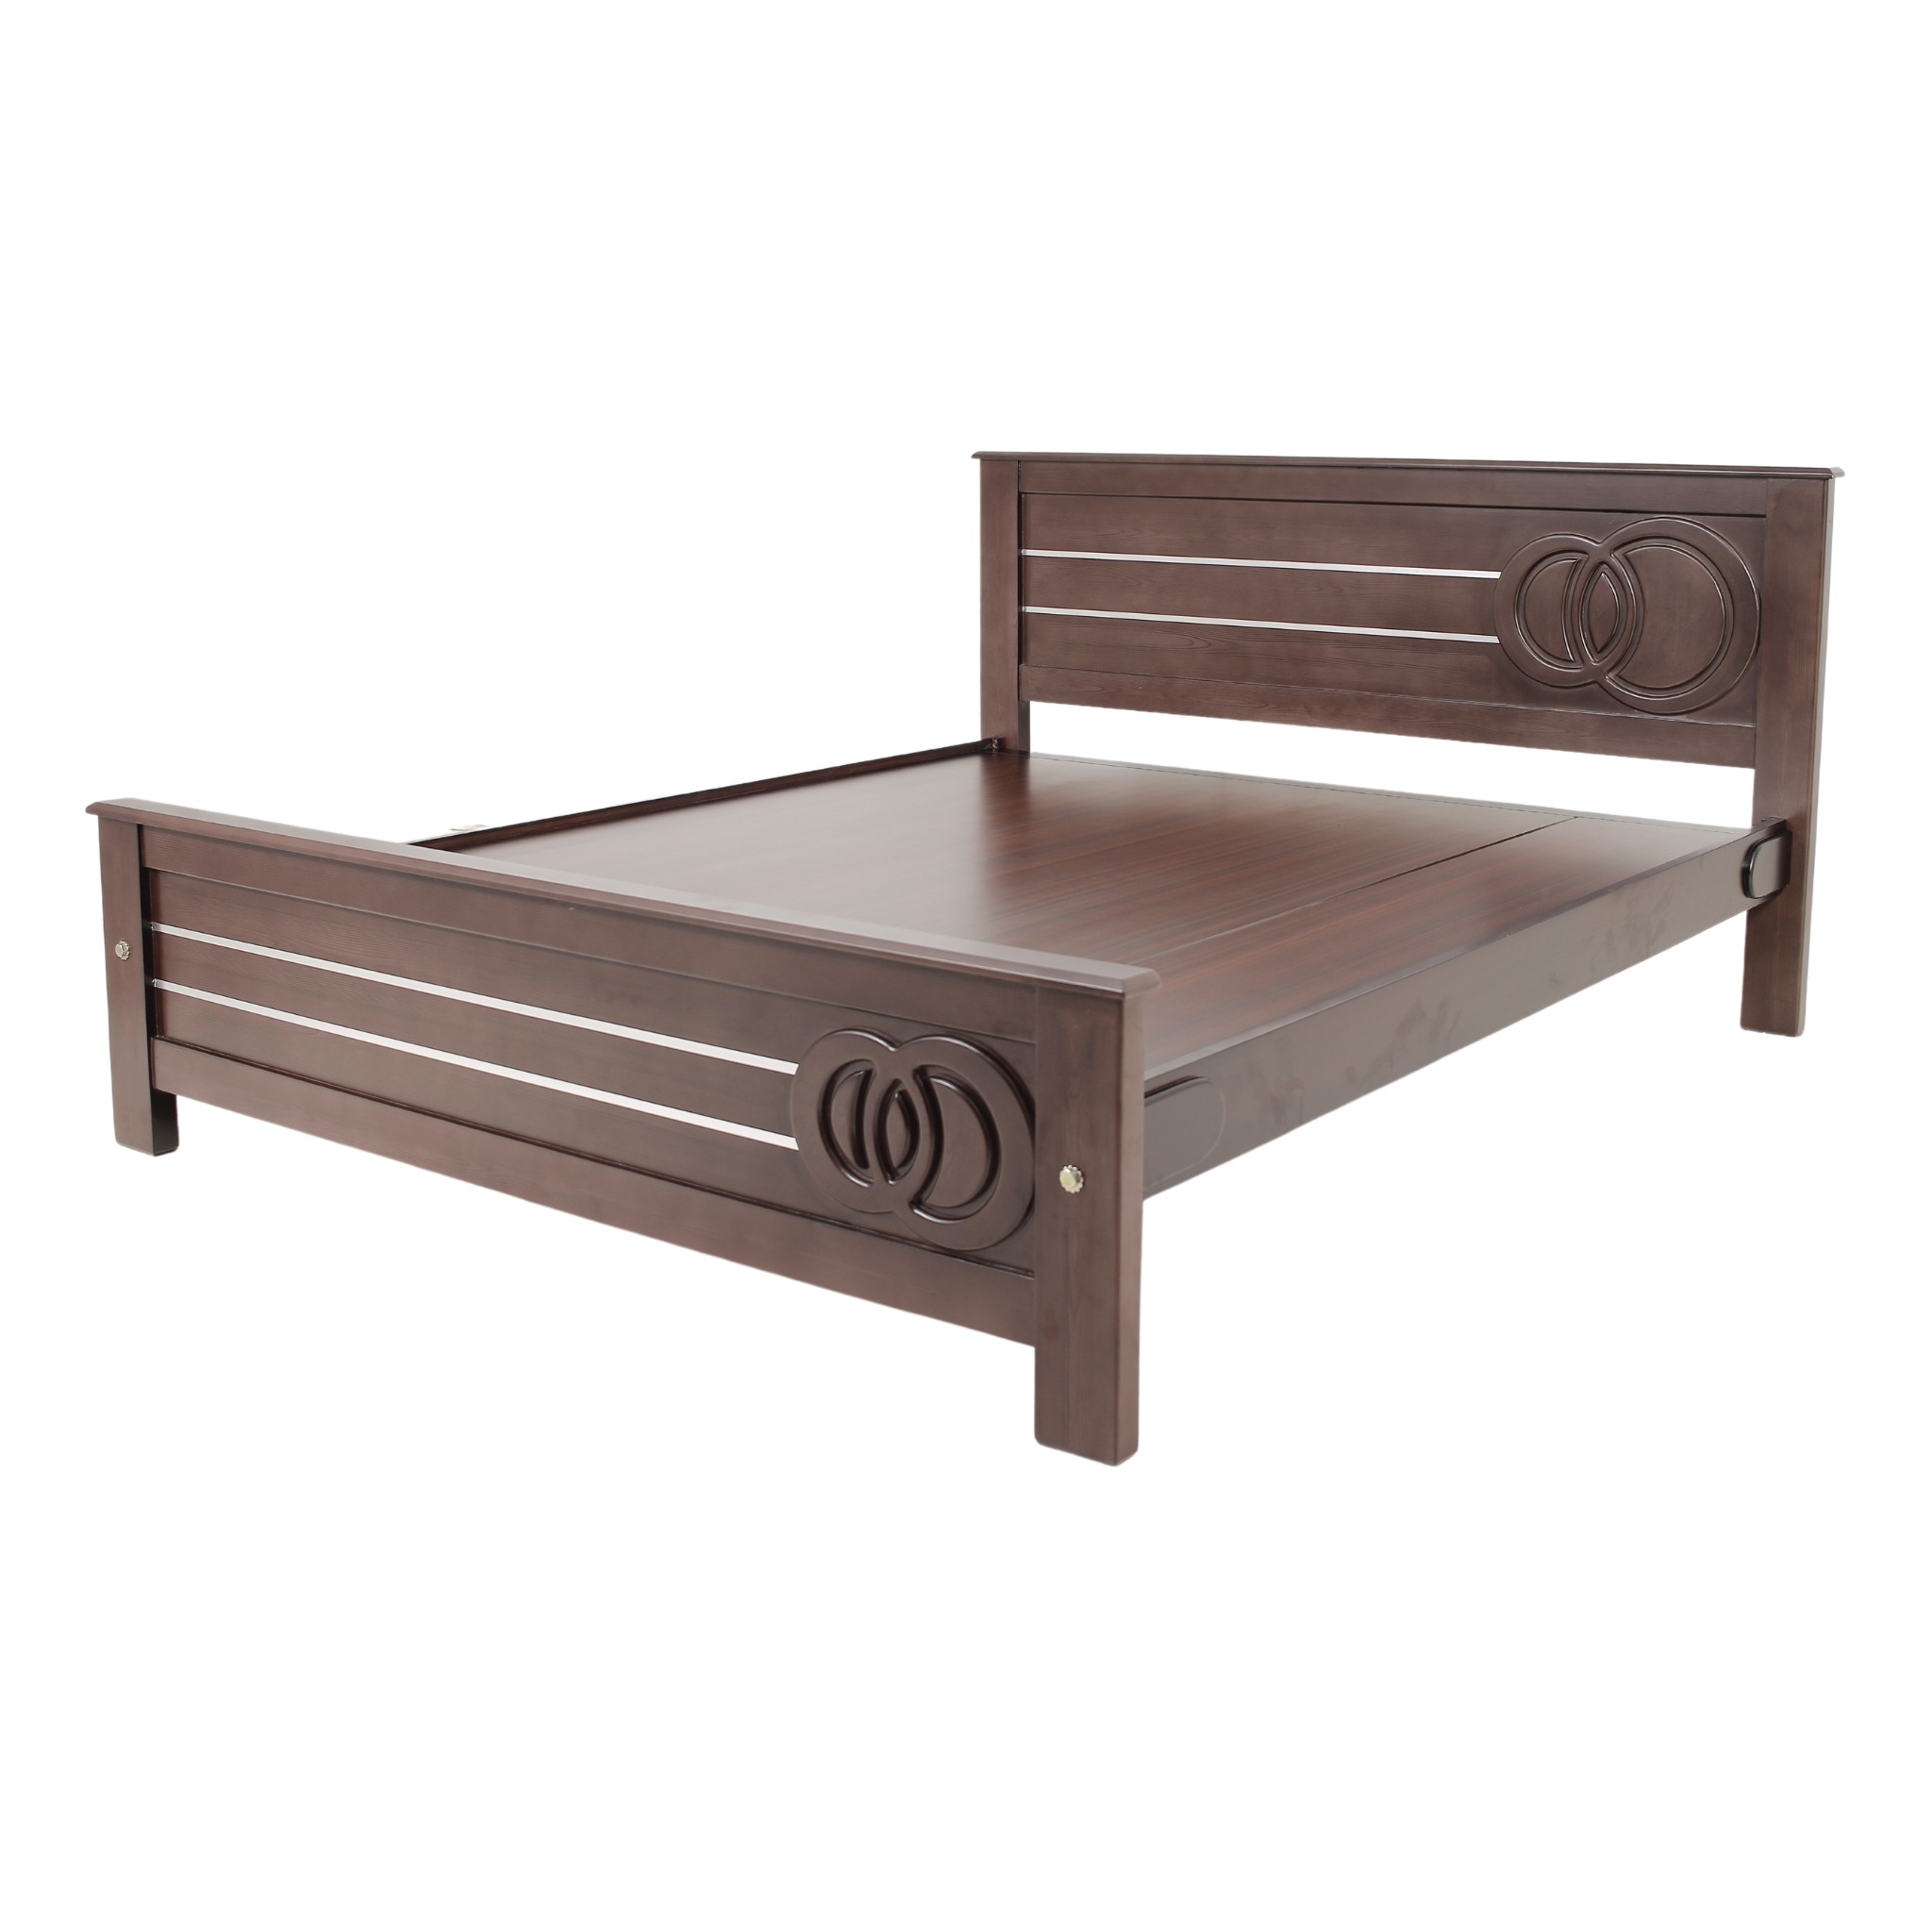 Oven Rubber Wood Bed